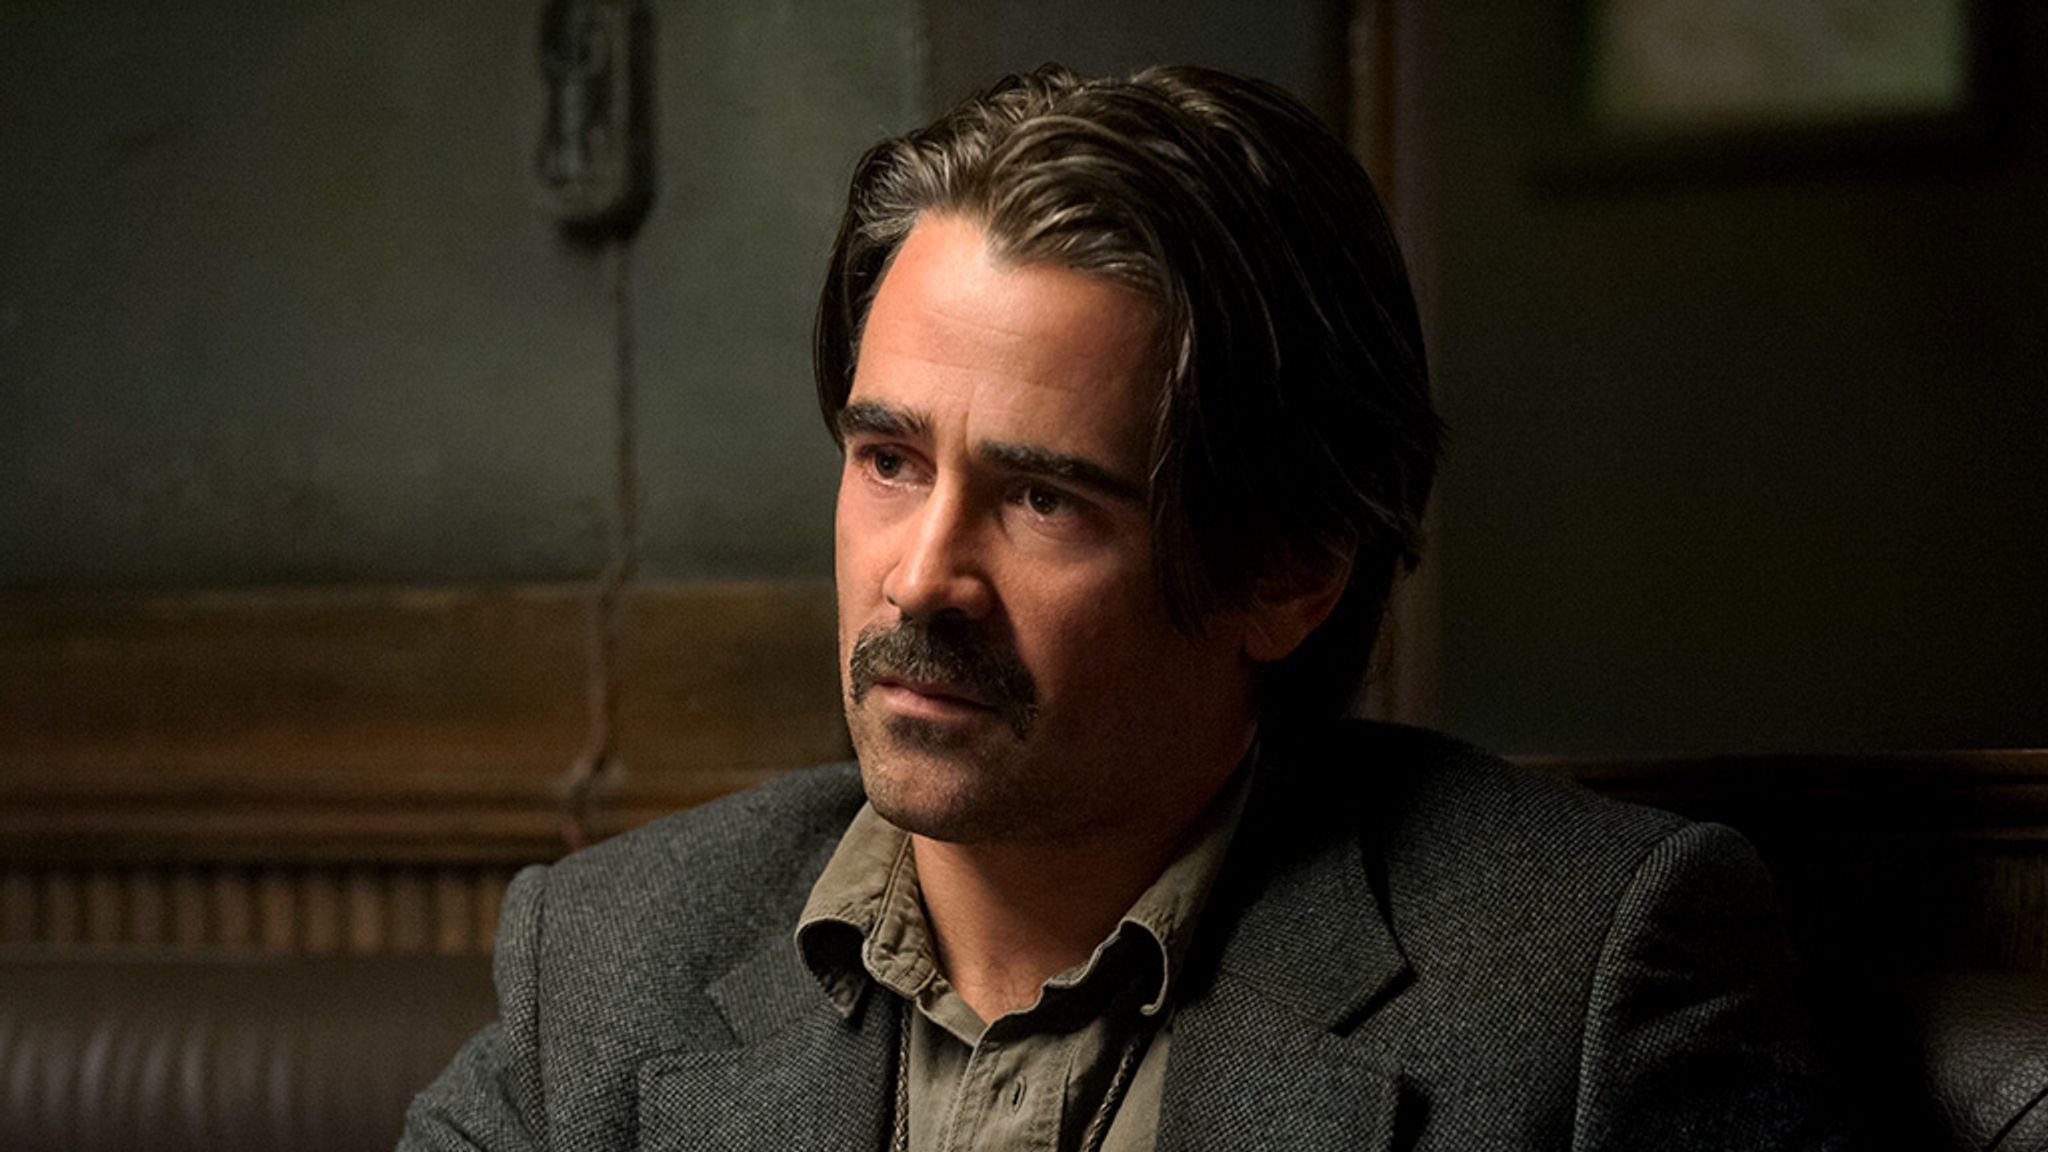 Colin Farrell played detective Ray Velcoro in the second season.